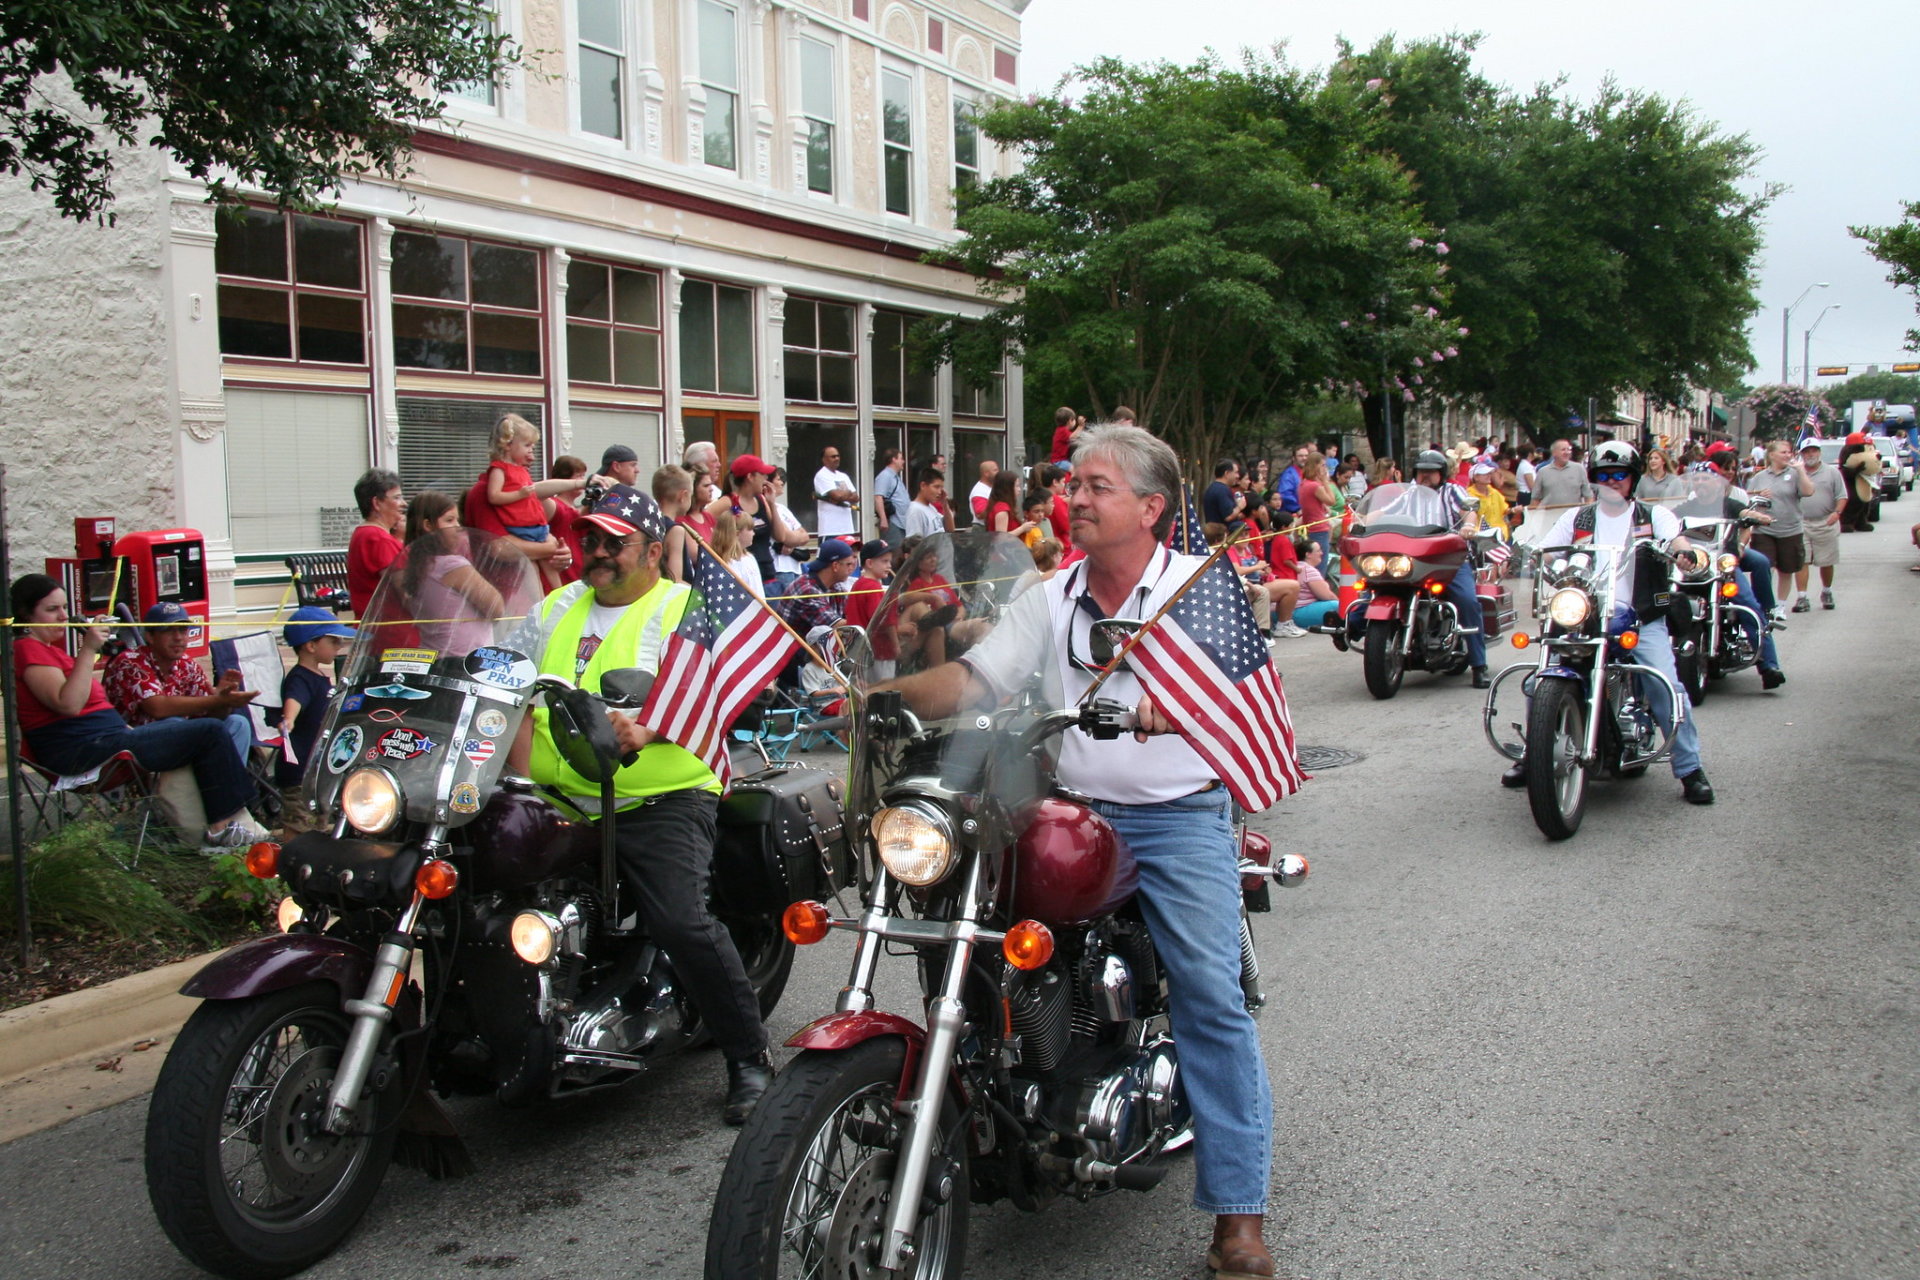 Georgetown 4th of July Fireworks, Shows, Events & Parades